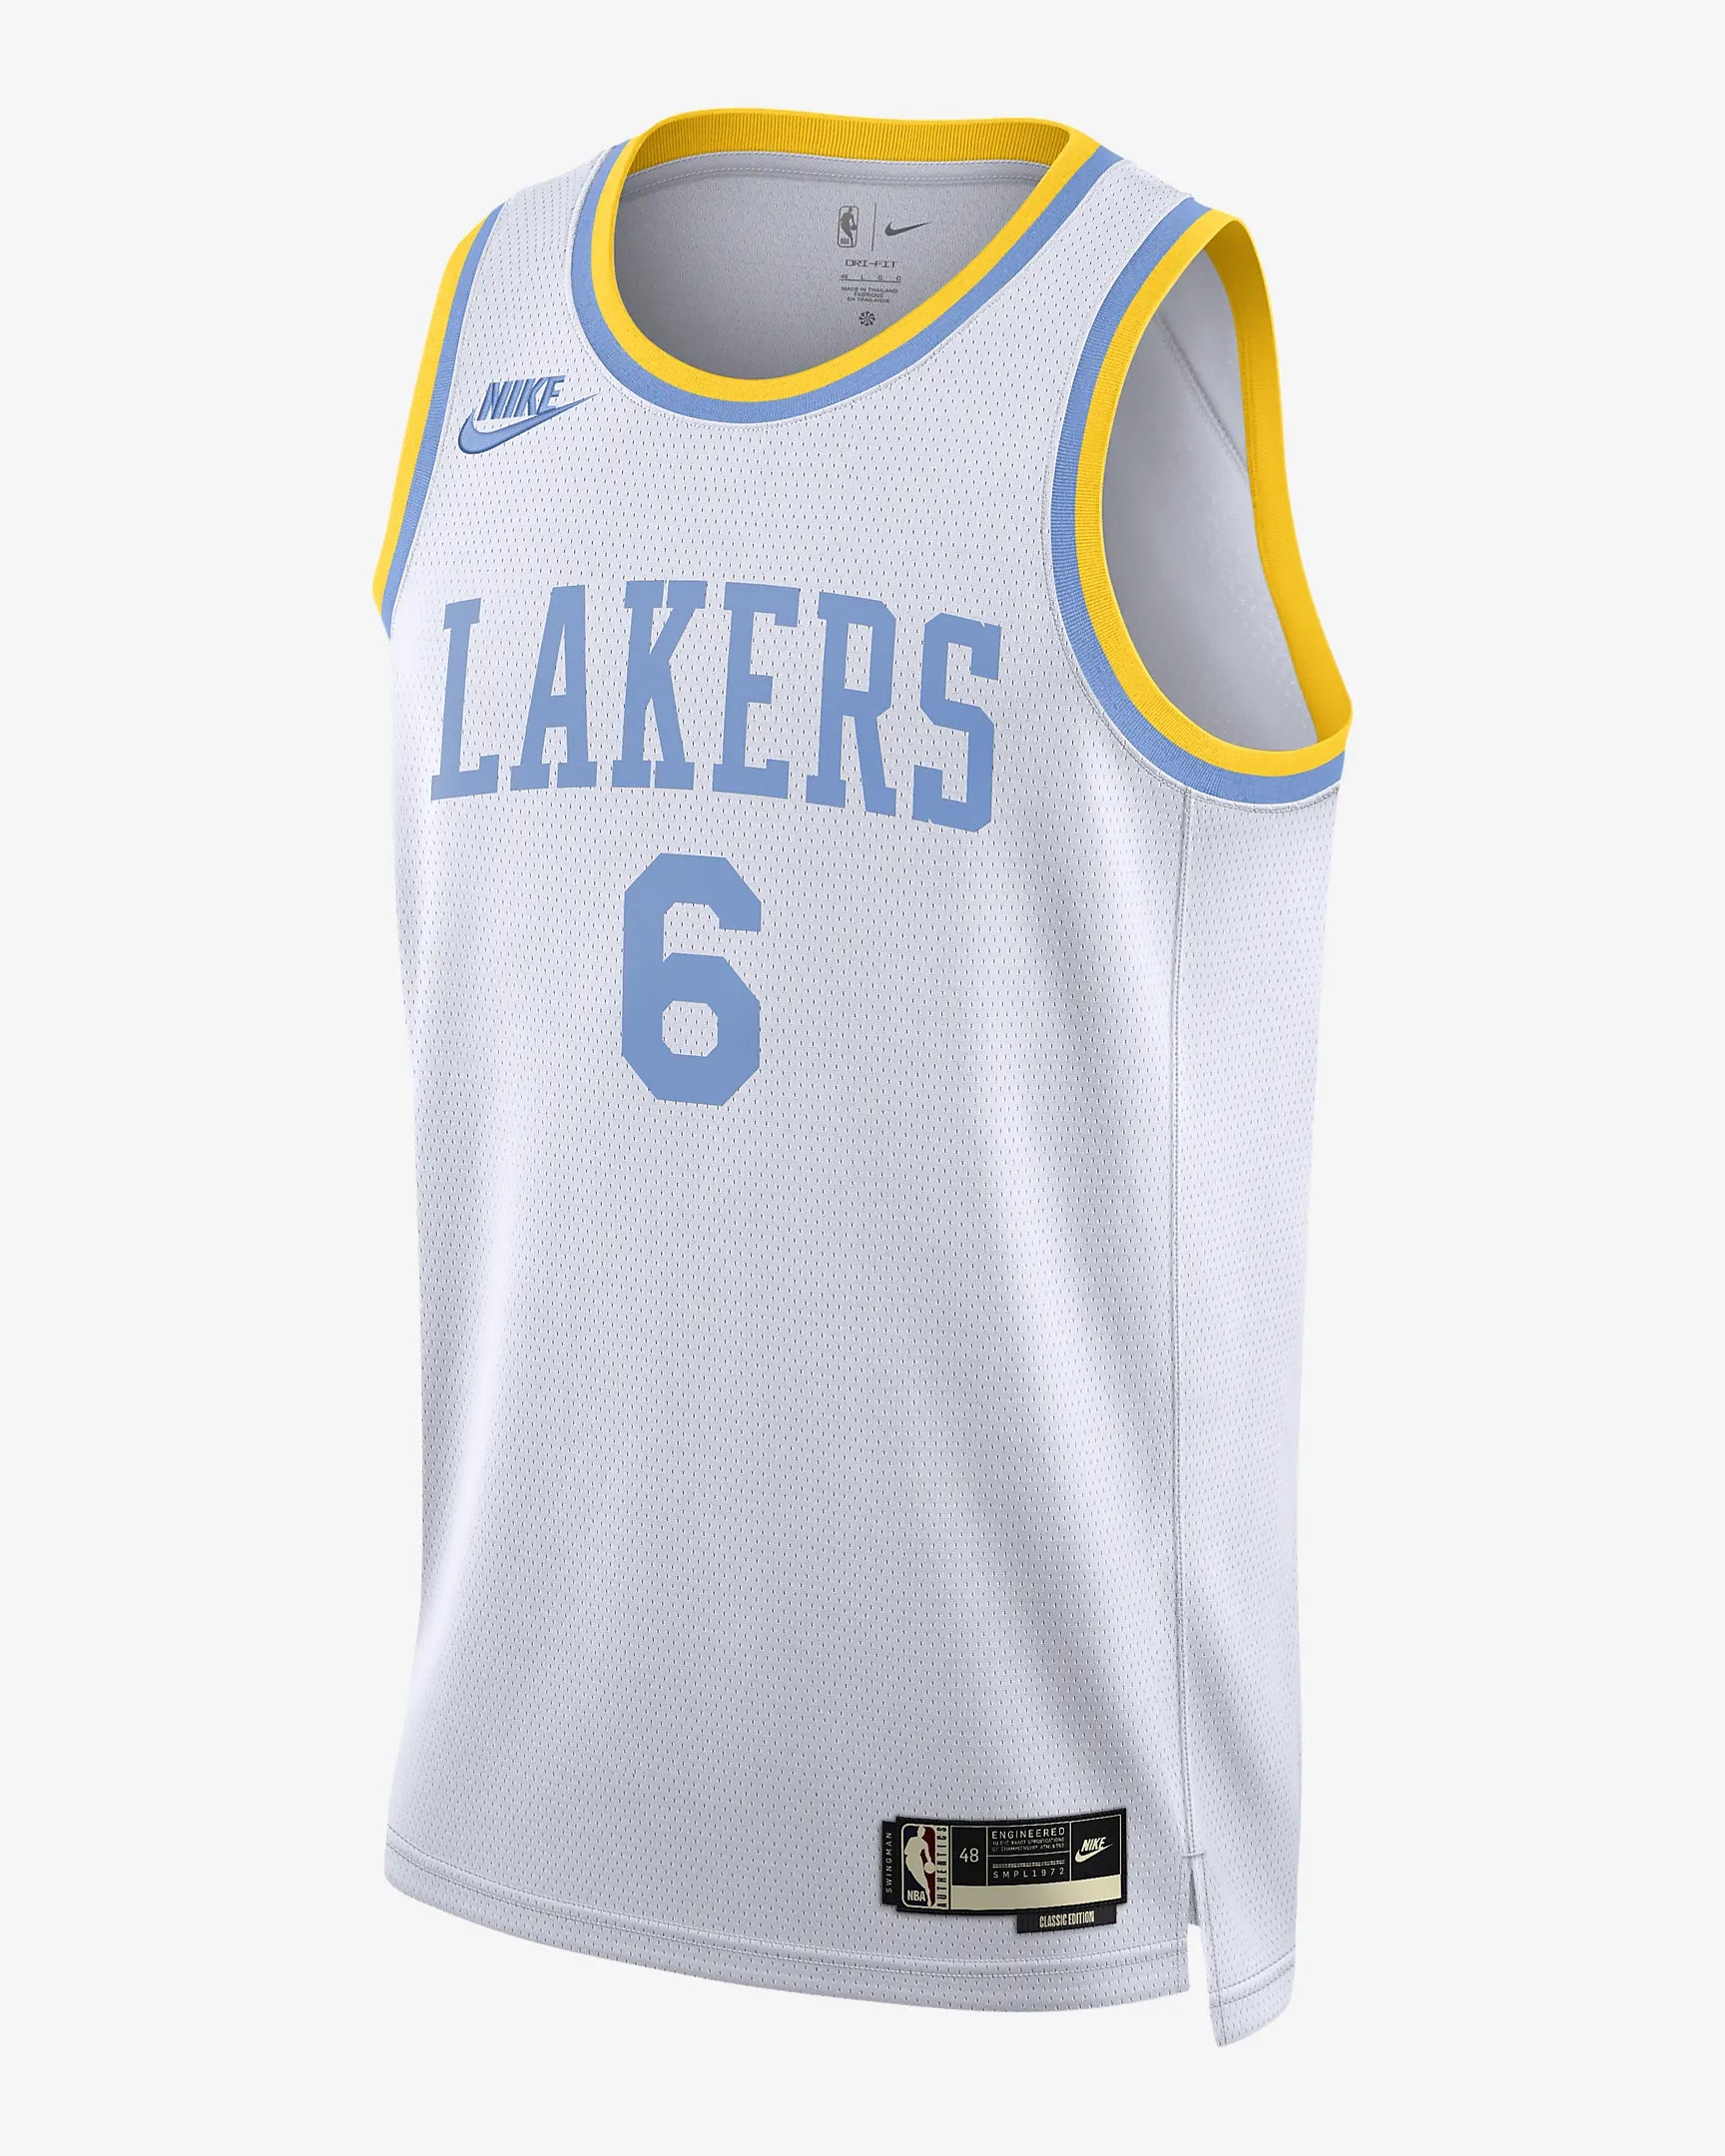 Nike's Jersey deal ends with the NBA in 2024. This is my